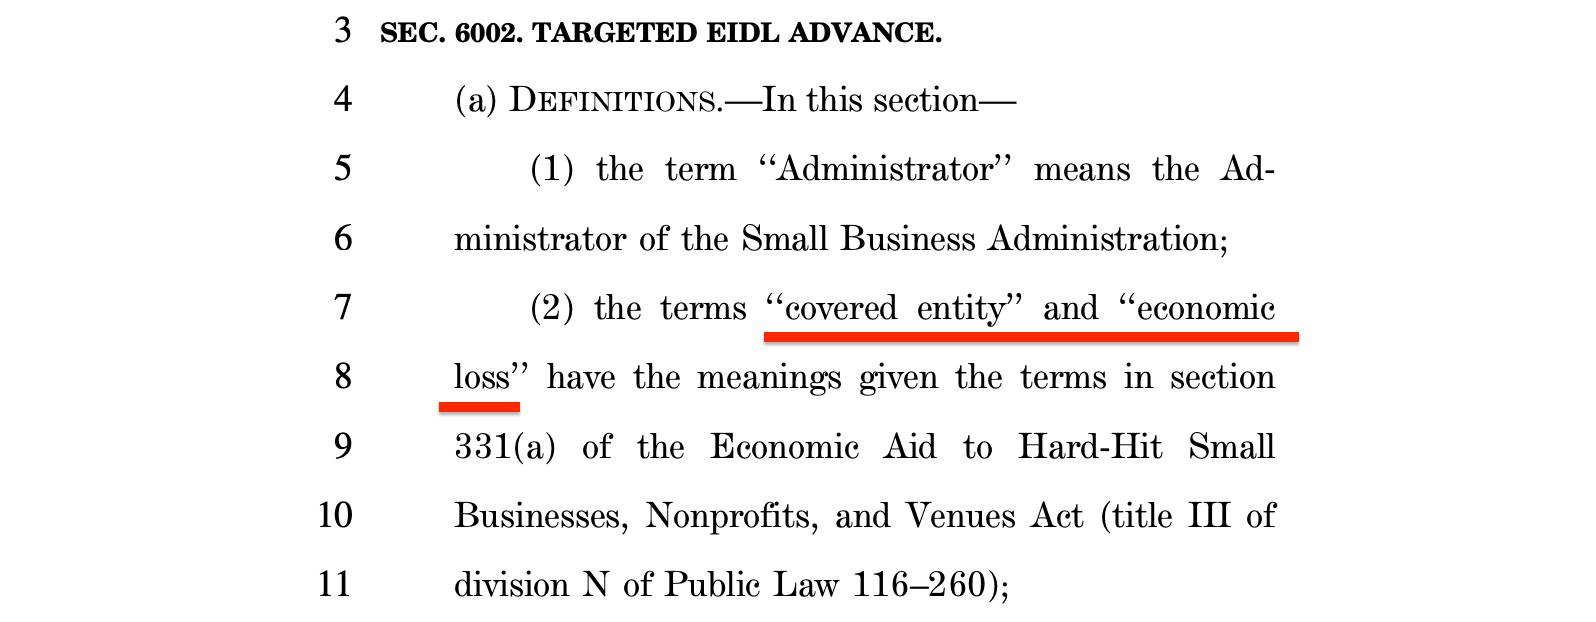 https://static.helloskip.com/blog/2021/02/Covered-Entities-Definition-in-New-EIDL-Grant-Bill.png